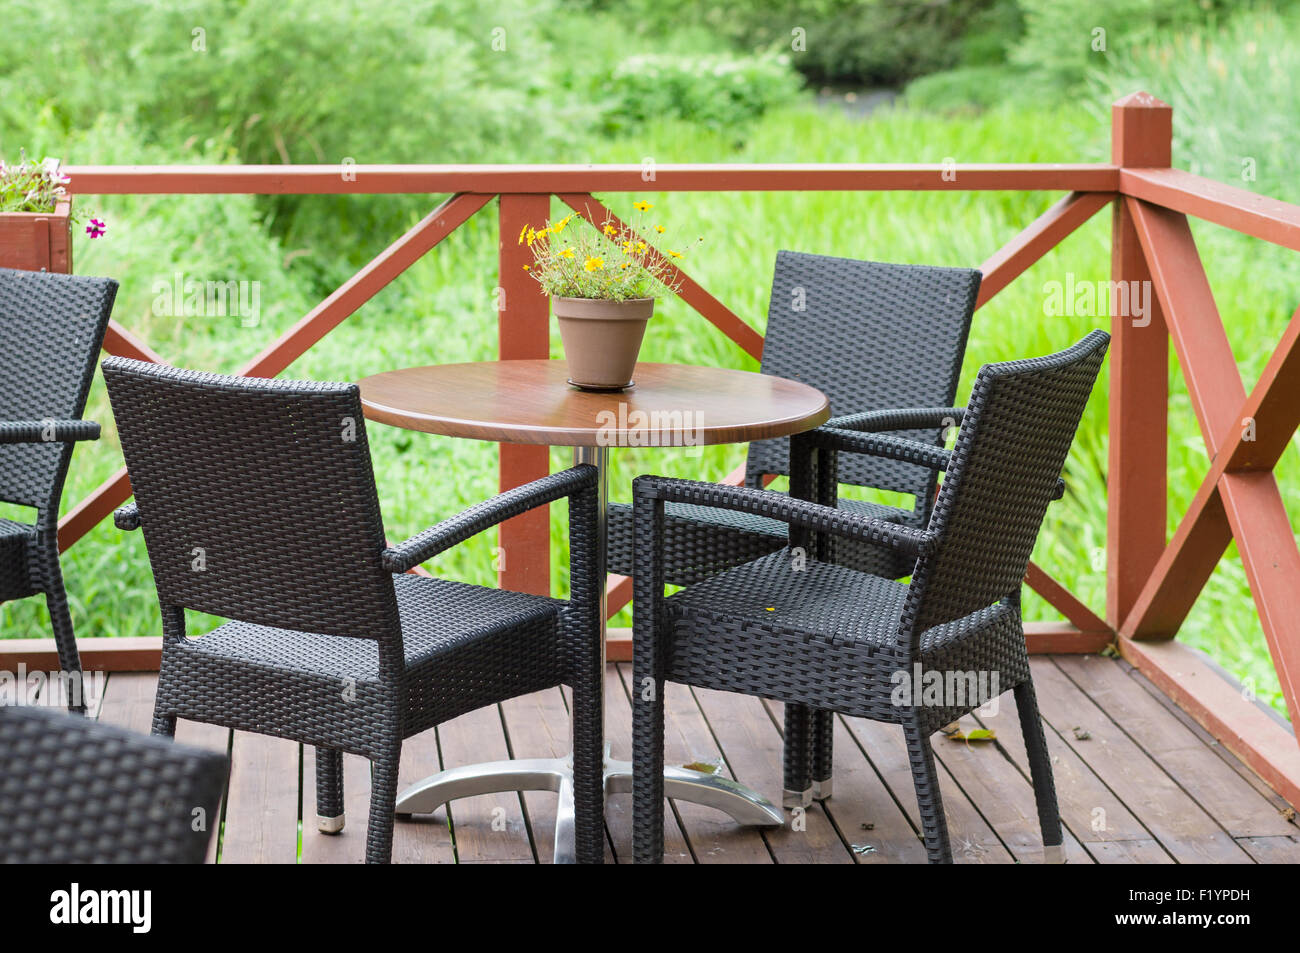 Outdoor terrace cafe table with three chairs Stock Photo